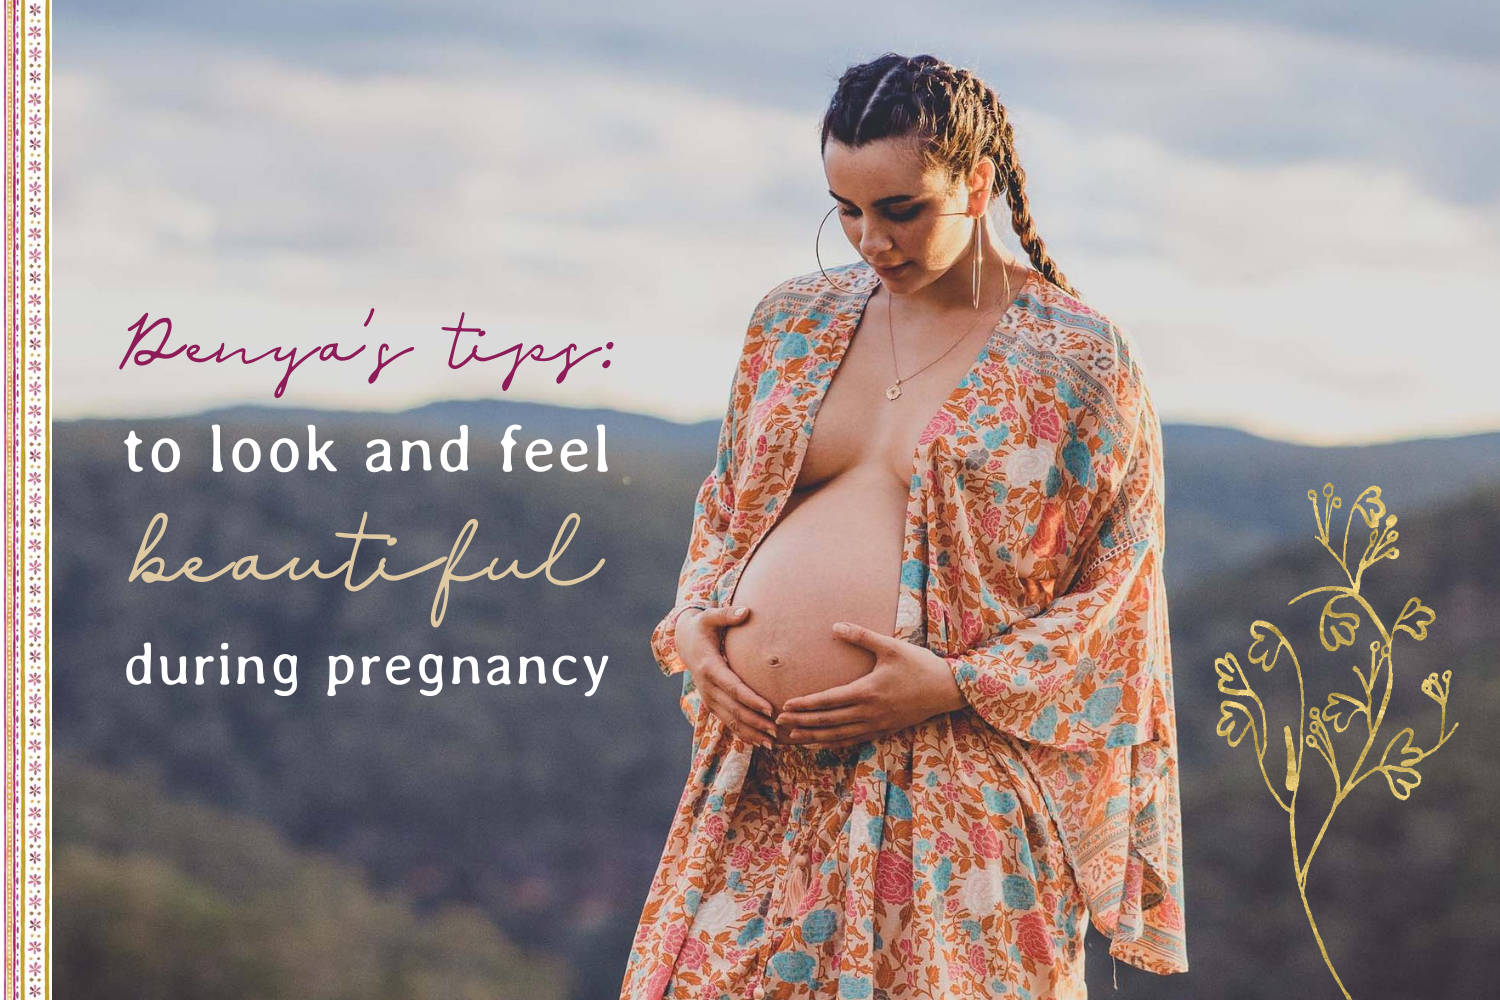 Mumma-To-Be: Denya’s tips on how to look and feel beautiful during pregnancy